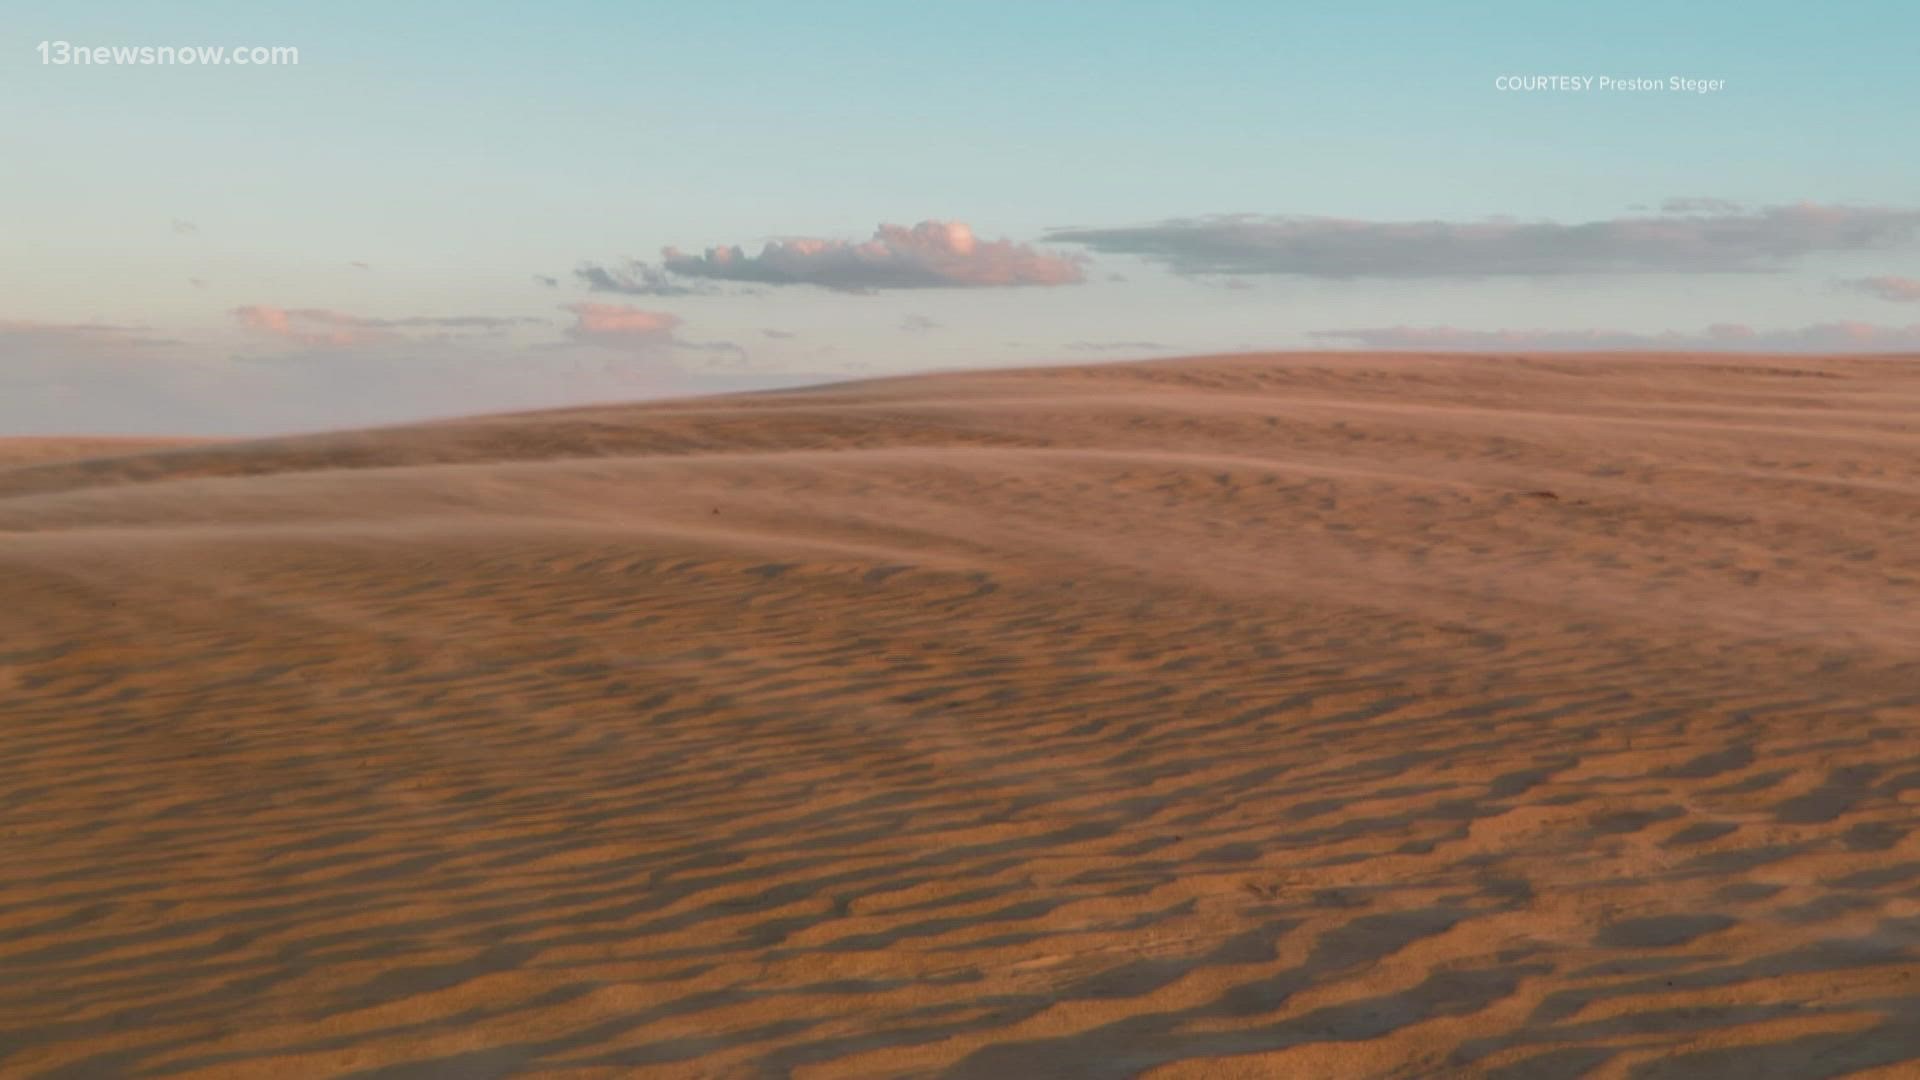 Located in Nags Head, the dune field at Jockey's Ridge State Park is comprised of sandy ridges and valleys that stay "alive" by changing in shape and size.